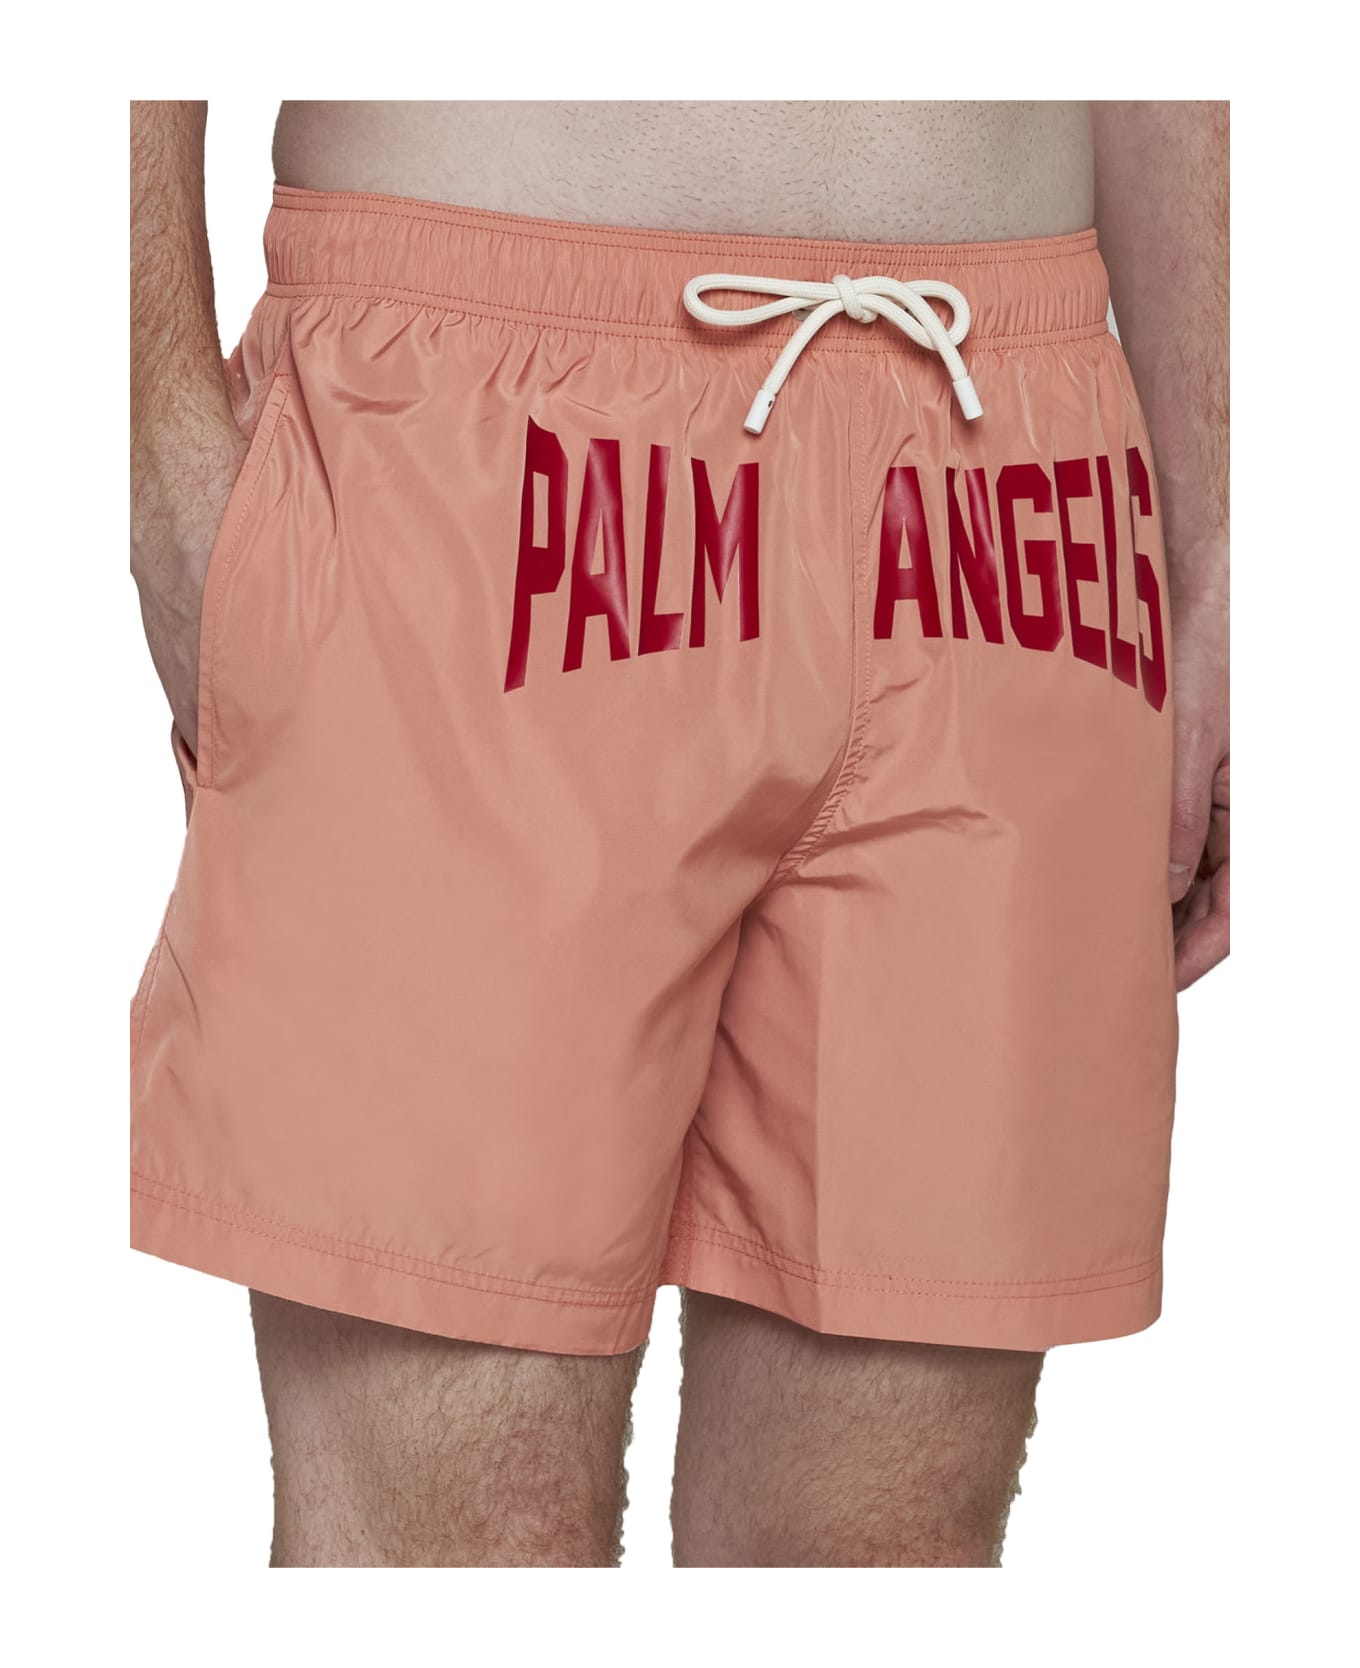 Palm Angels City Swimshort - Pink Red